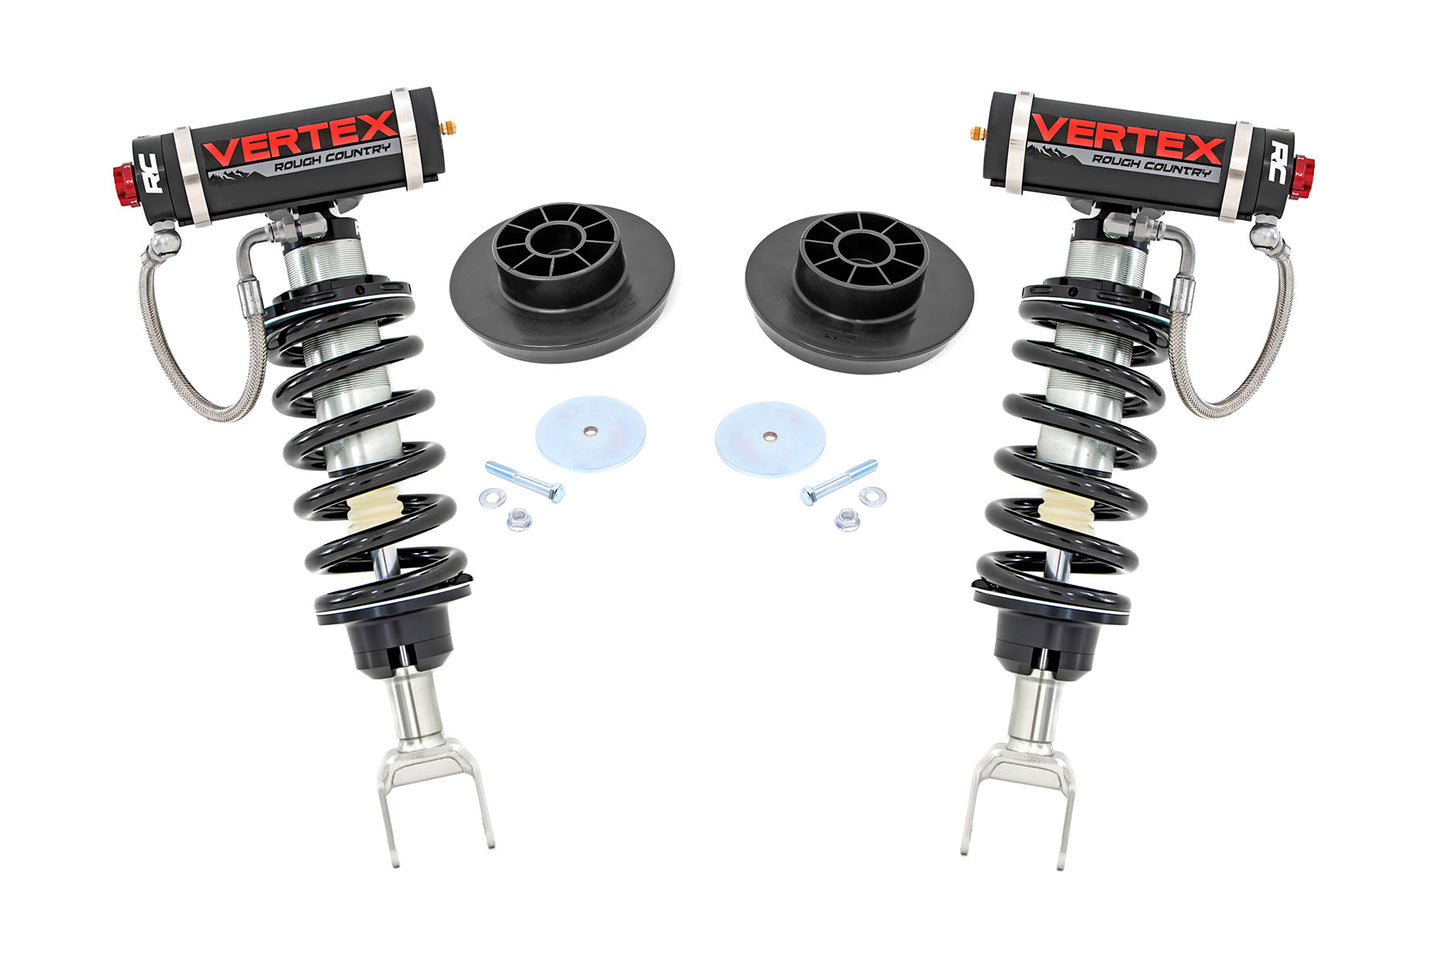 Rough Country (35850) 2 Inch Lift Kit | Vertex Coilovers | Ram 1500 4WD (2012-2018 & Classic)